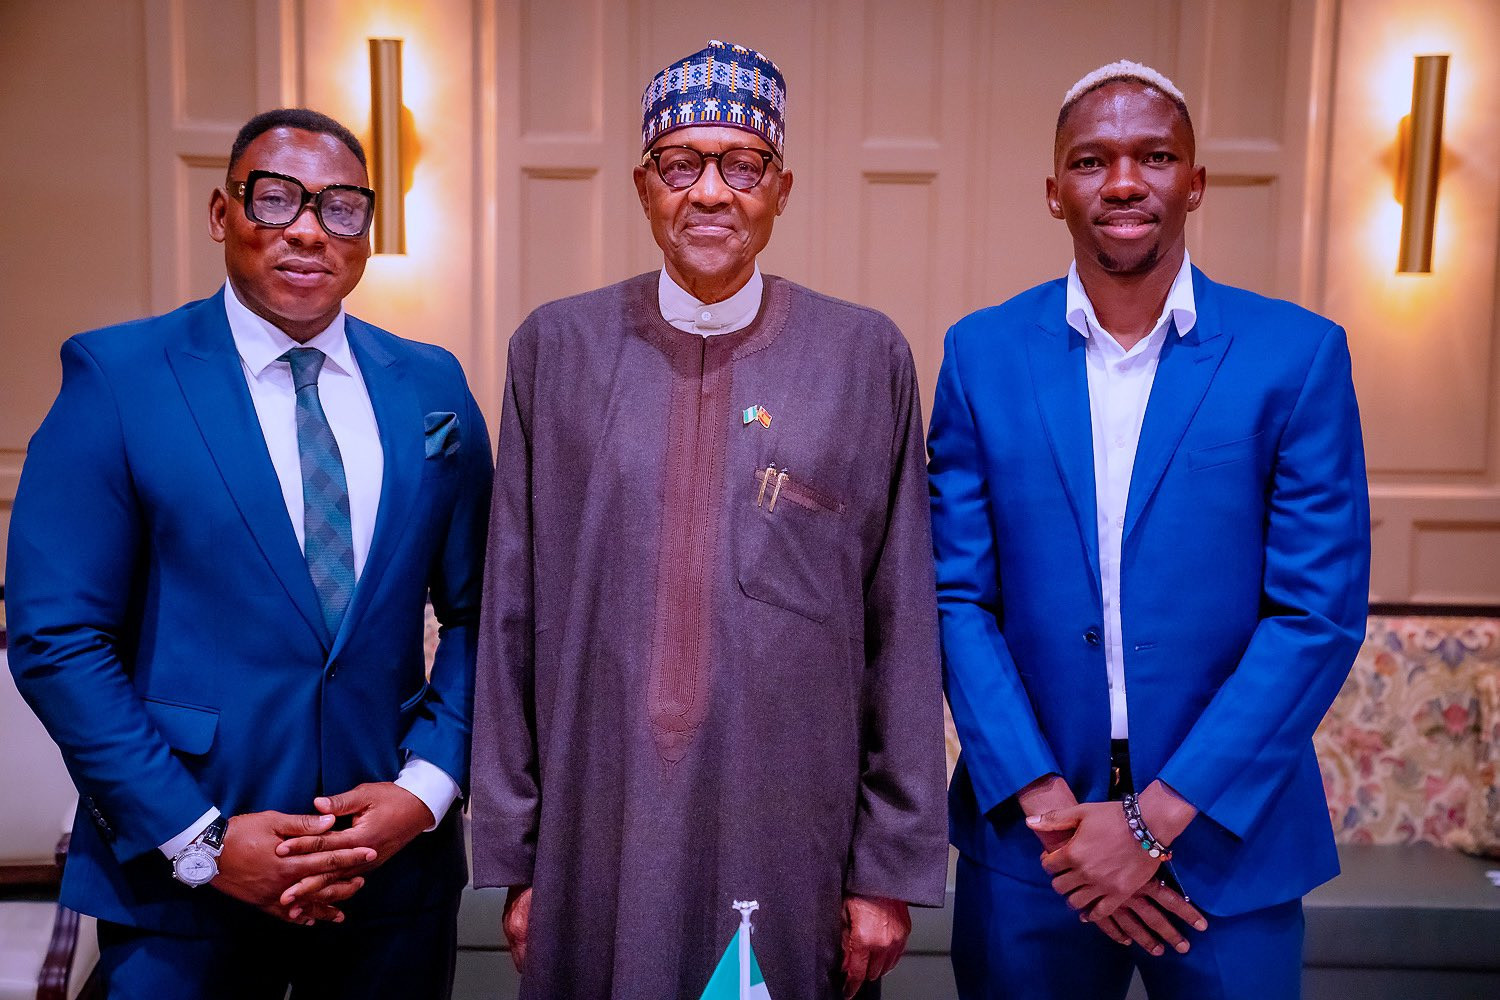 President Buhari meets  Daniel Omokachi and Kenneth Omeruo in Spain, receives signed balls and jerseys (photos)